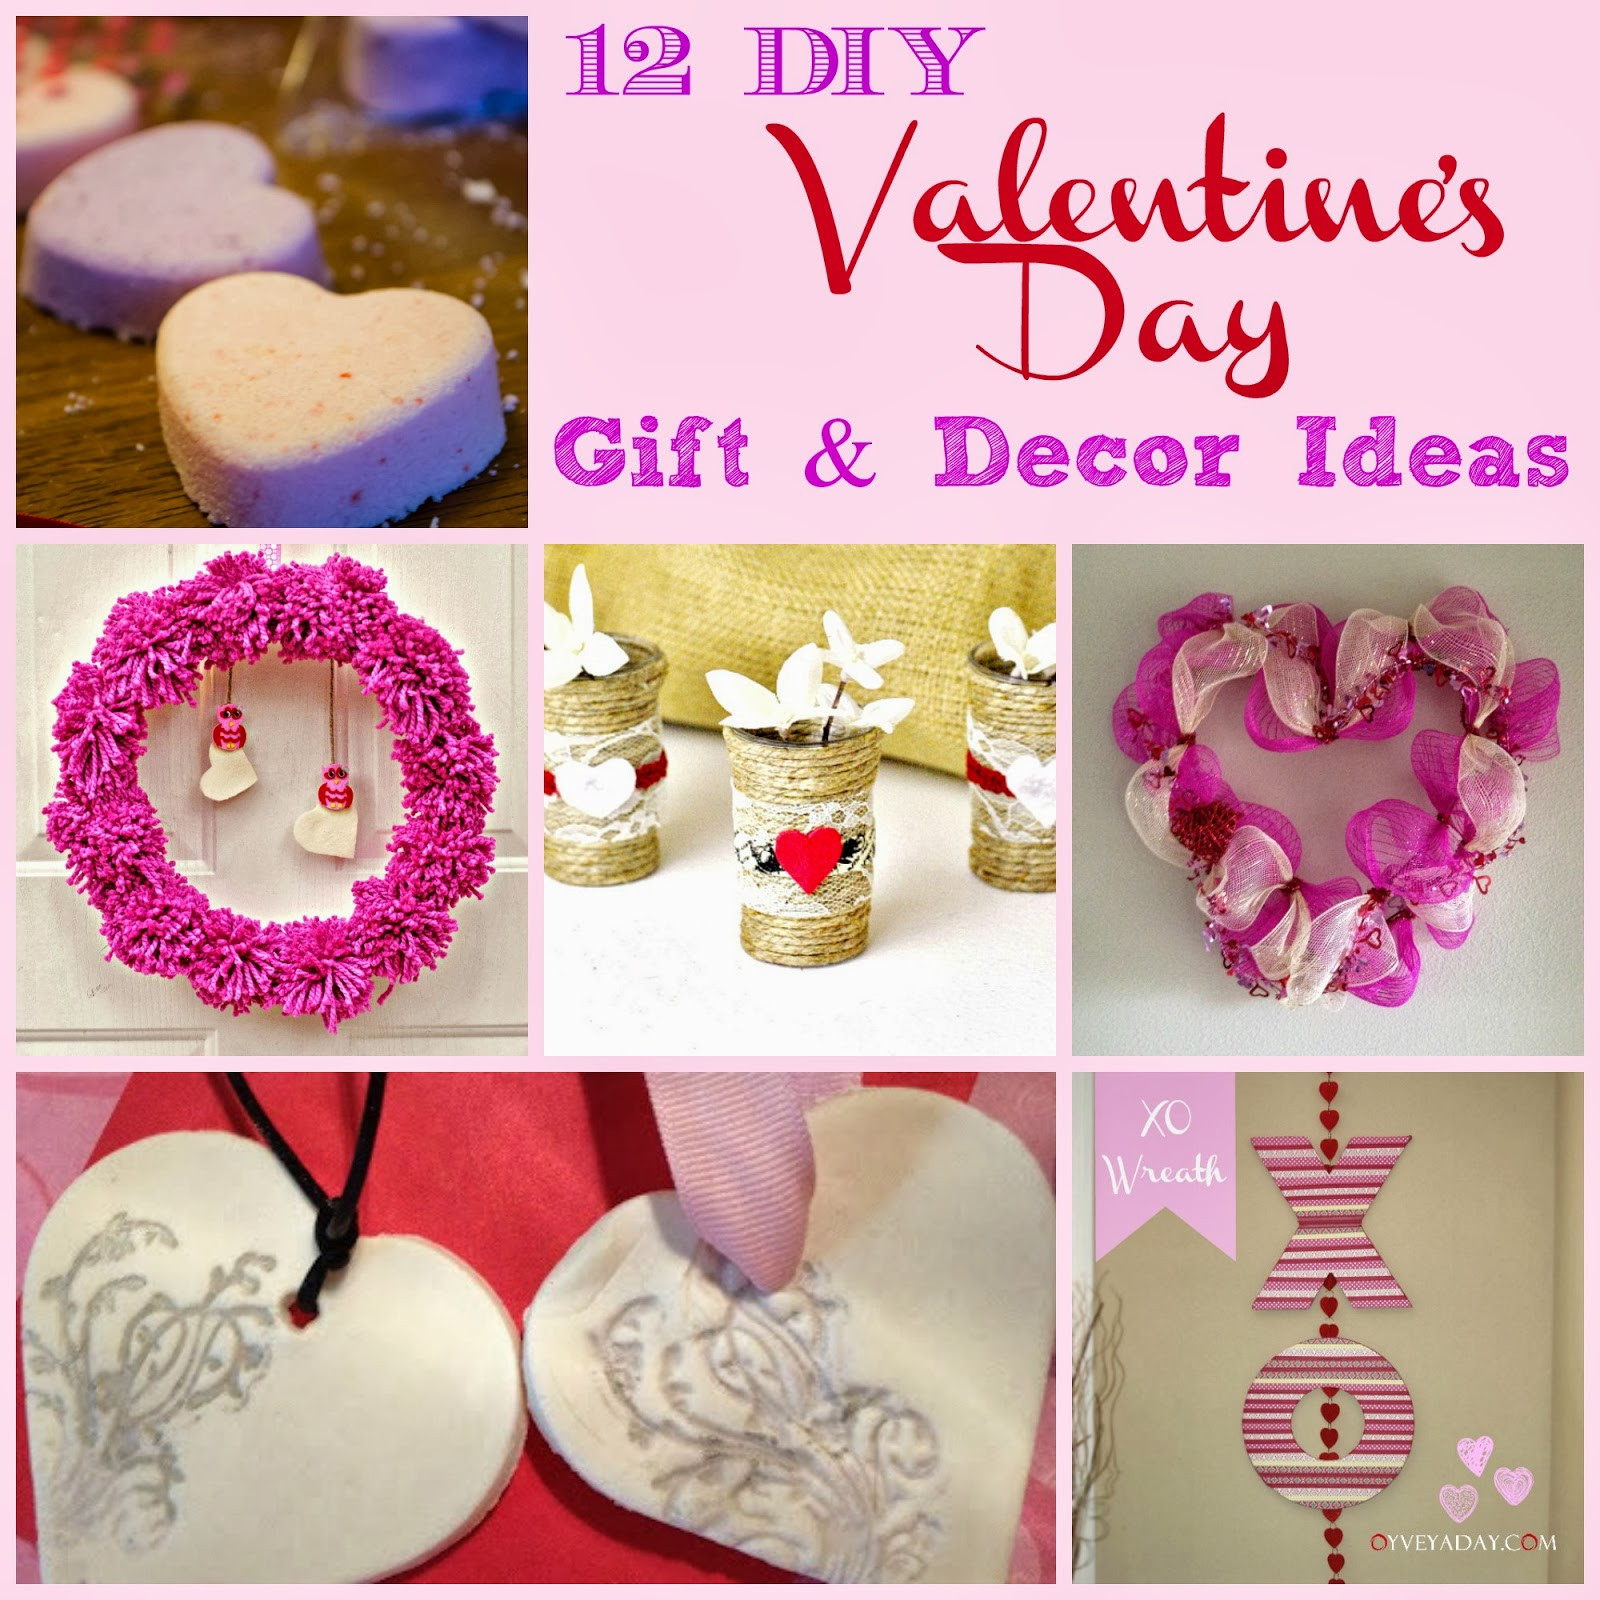 Valentines Day Gift Ideas
 12 DIY Valentine s Day Gift & Decor Ideas Outnumbered 3 to 1